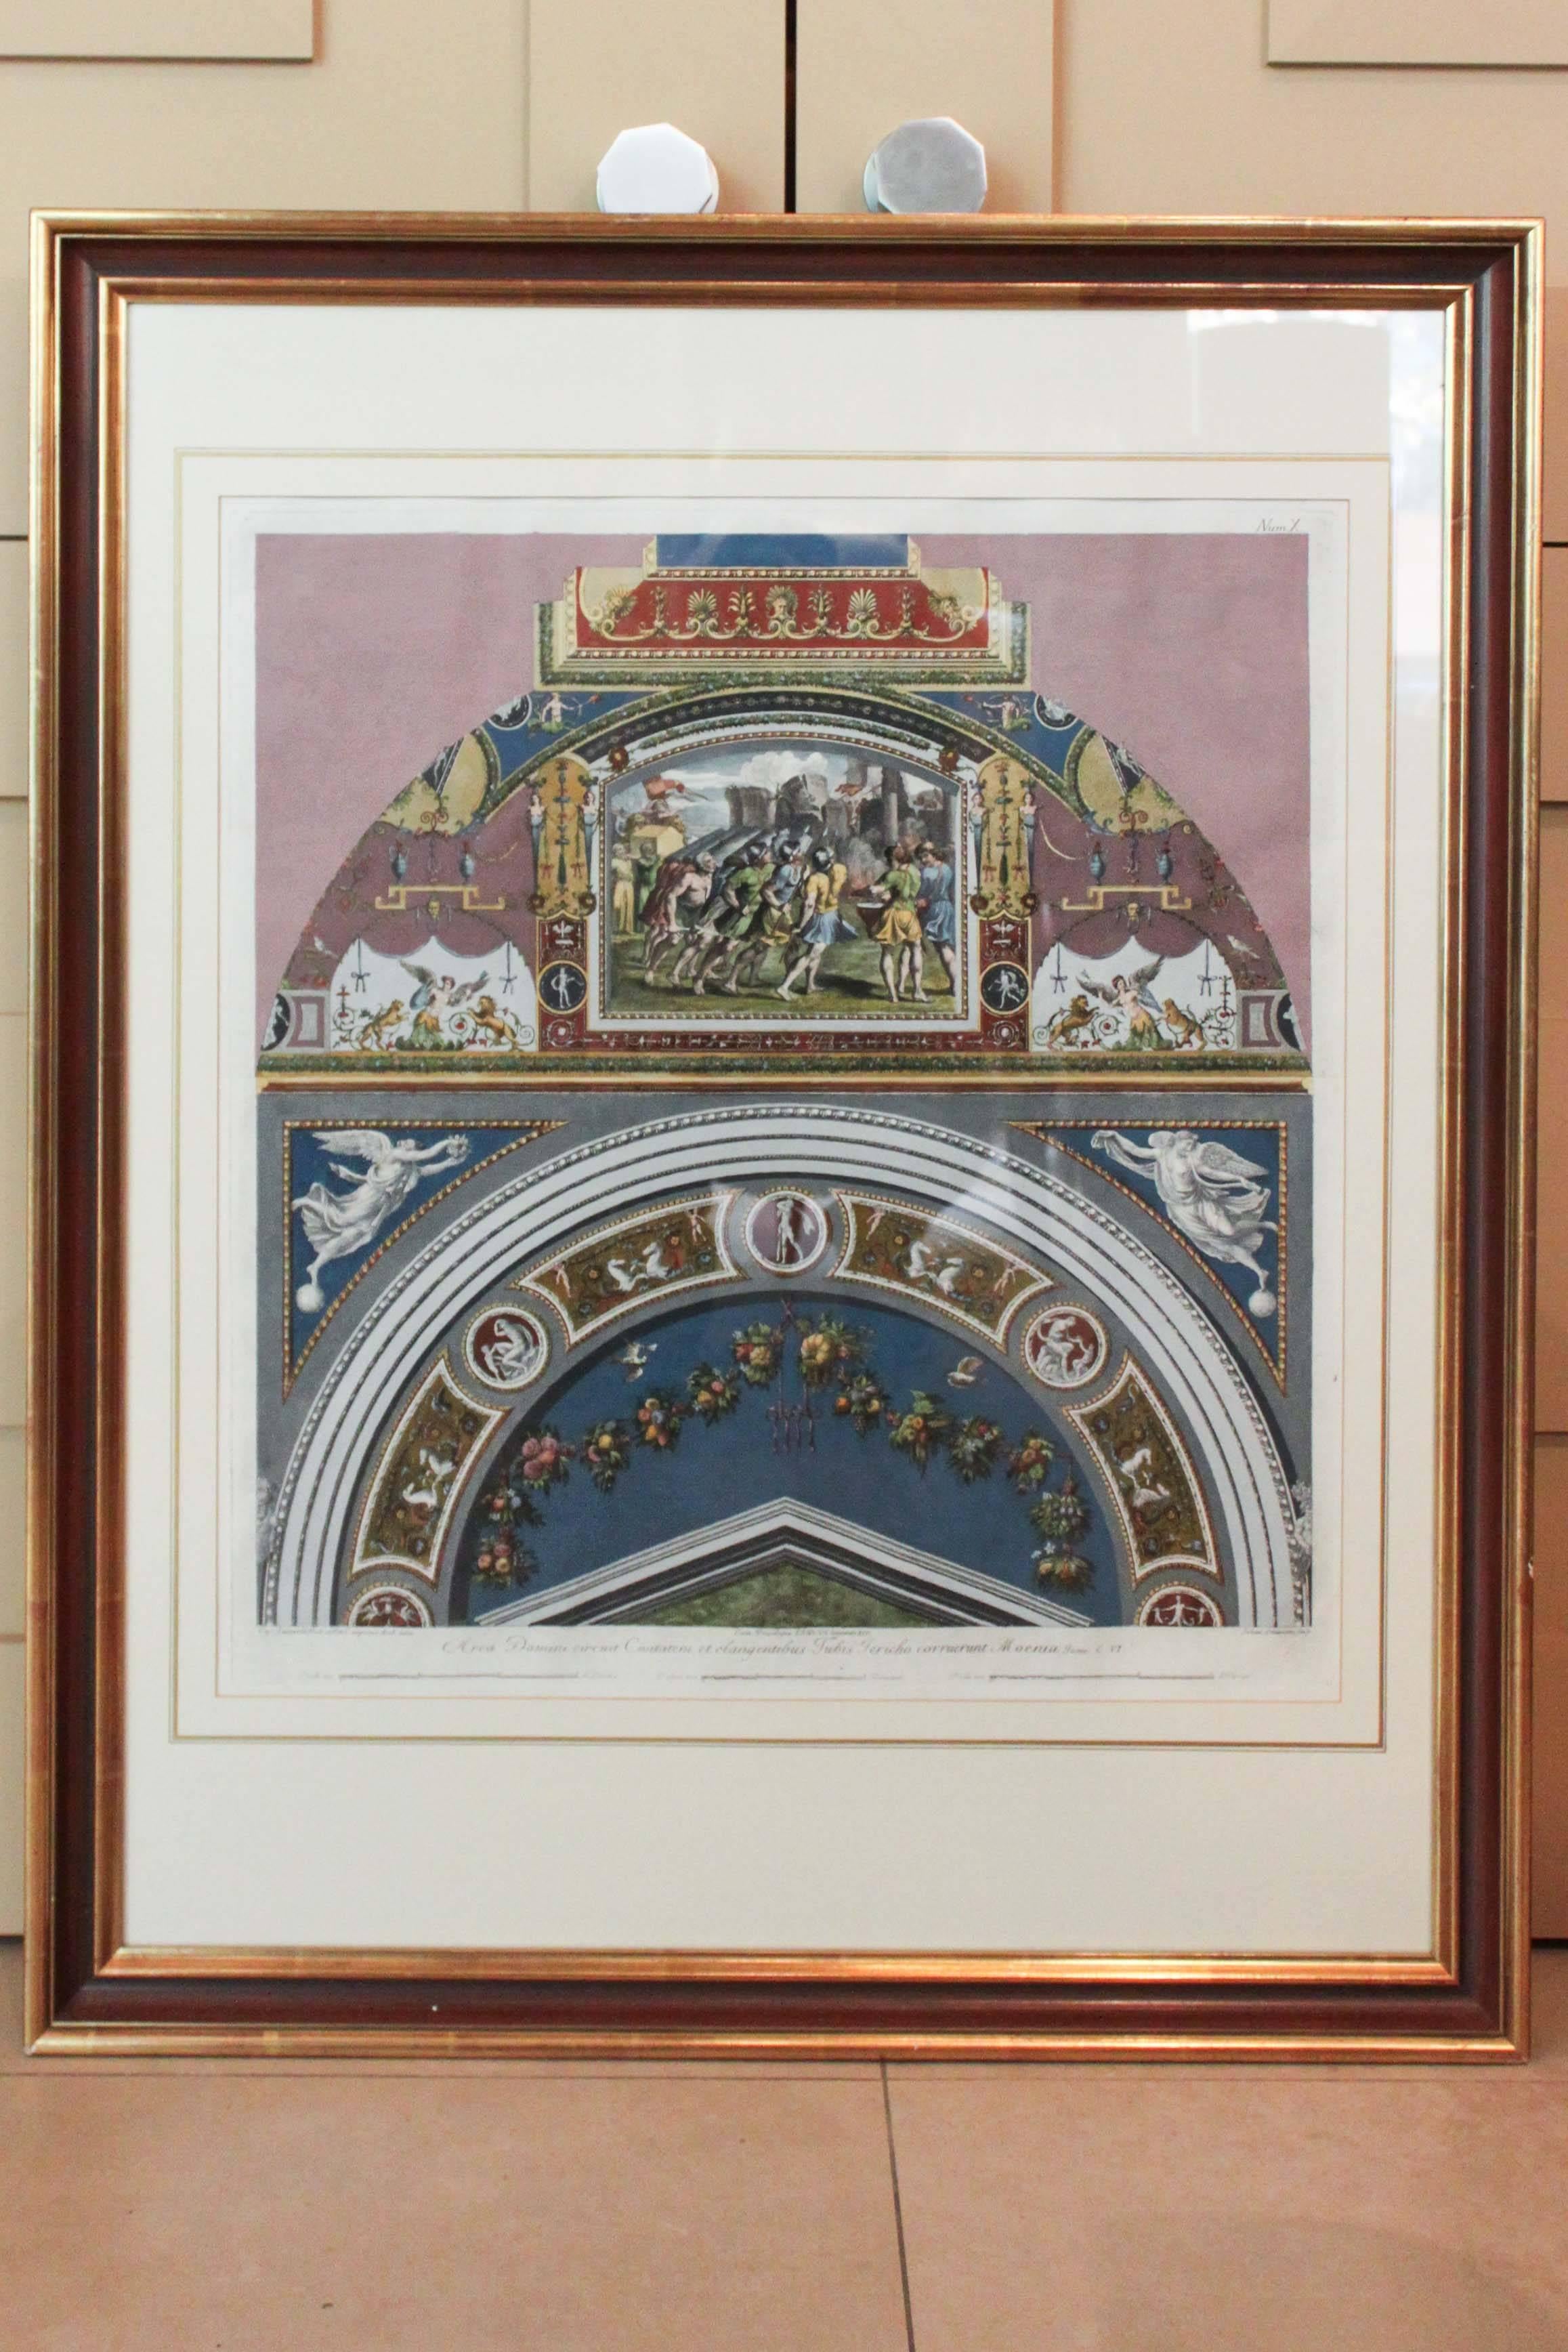 Set of six engravings out of a complete thirteen available. Colourful neoclassical works after Raphael of the Vatican Loggia. Professionally mounted and framed. 

Minor losses/irregularities in frame, minor wave in some of the prints and